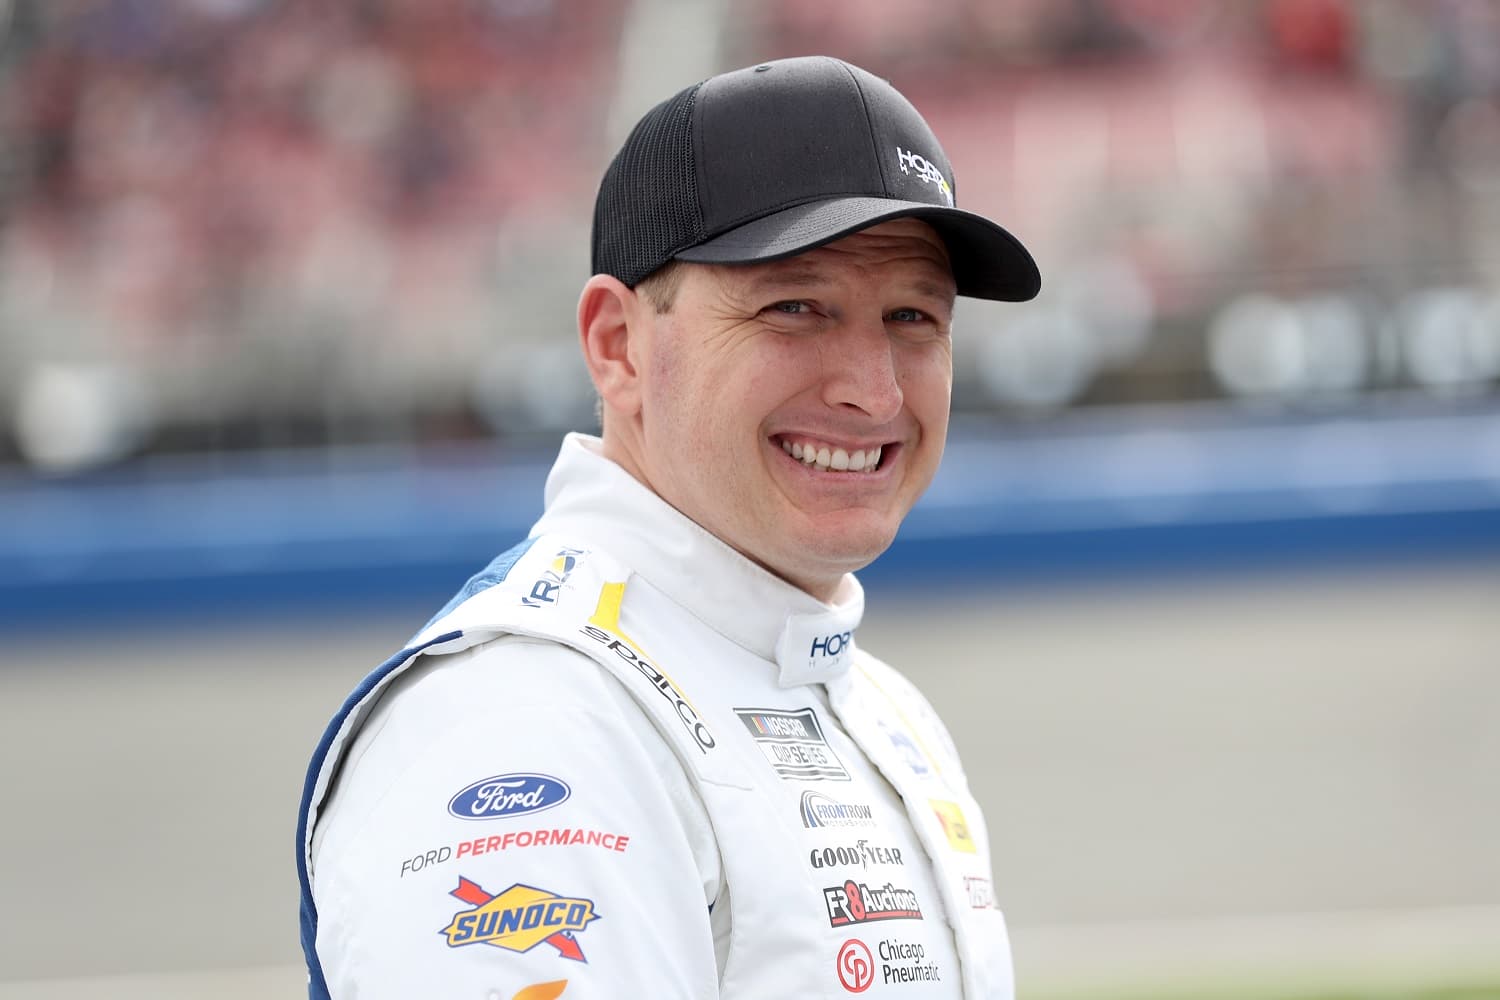 Michael McDowell waits on the grid prior to the NASCAR Cup Series Pala Casino 400 at Auto Club Speedway on Feb. 26, 2023. | Meg Oliphant/Getty Images